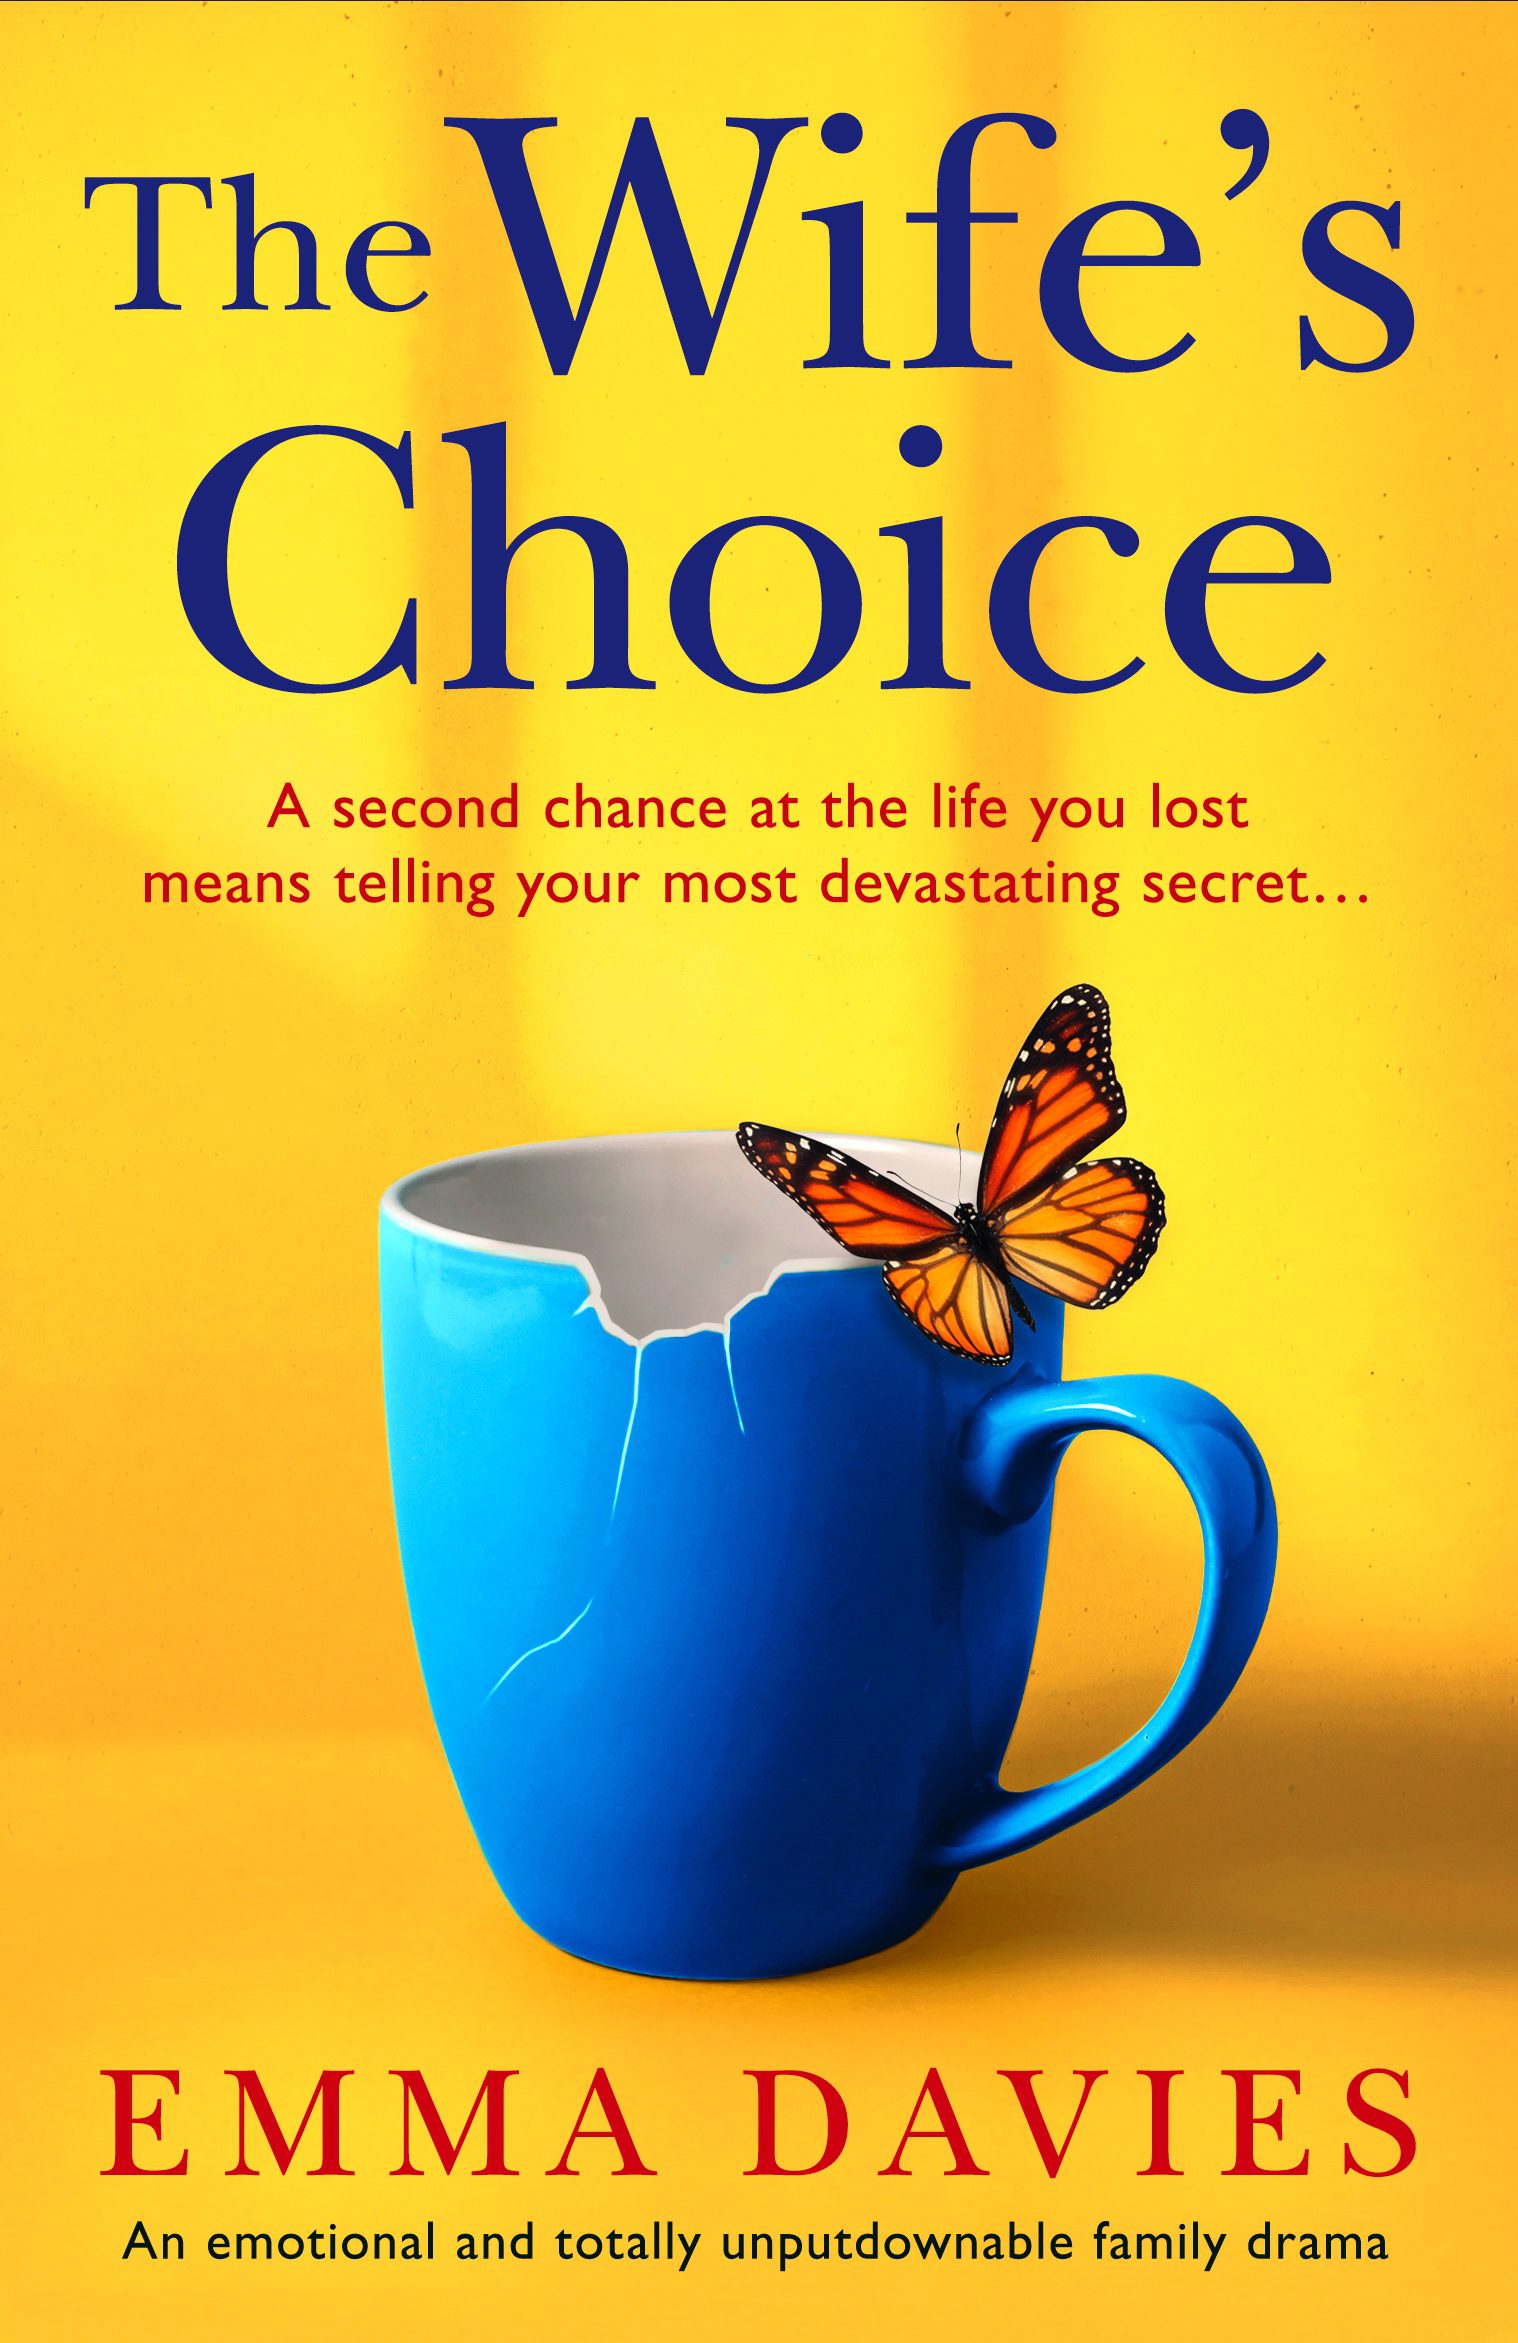 The Wife's Choice book cover